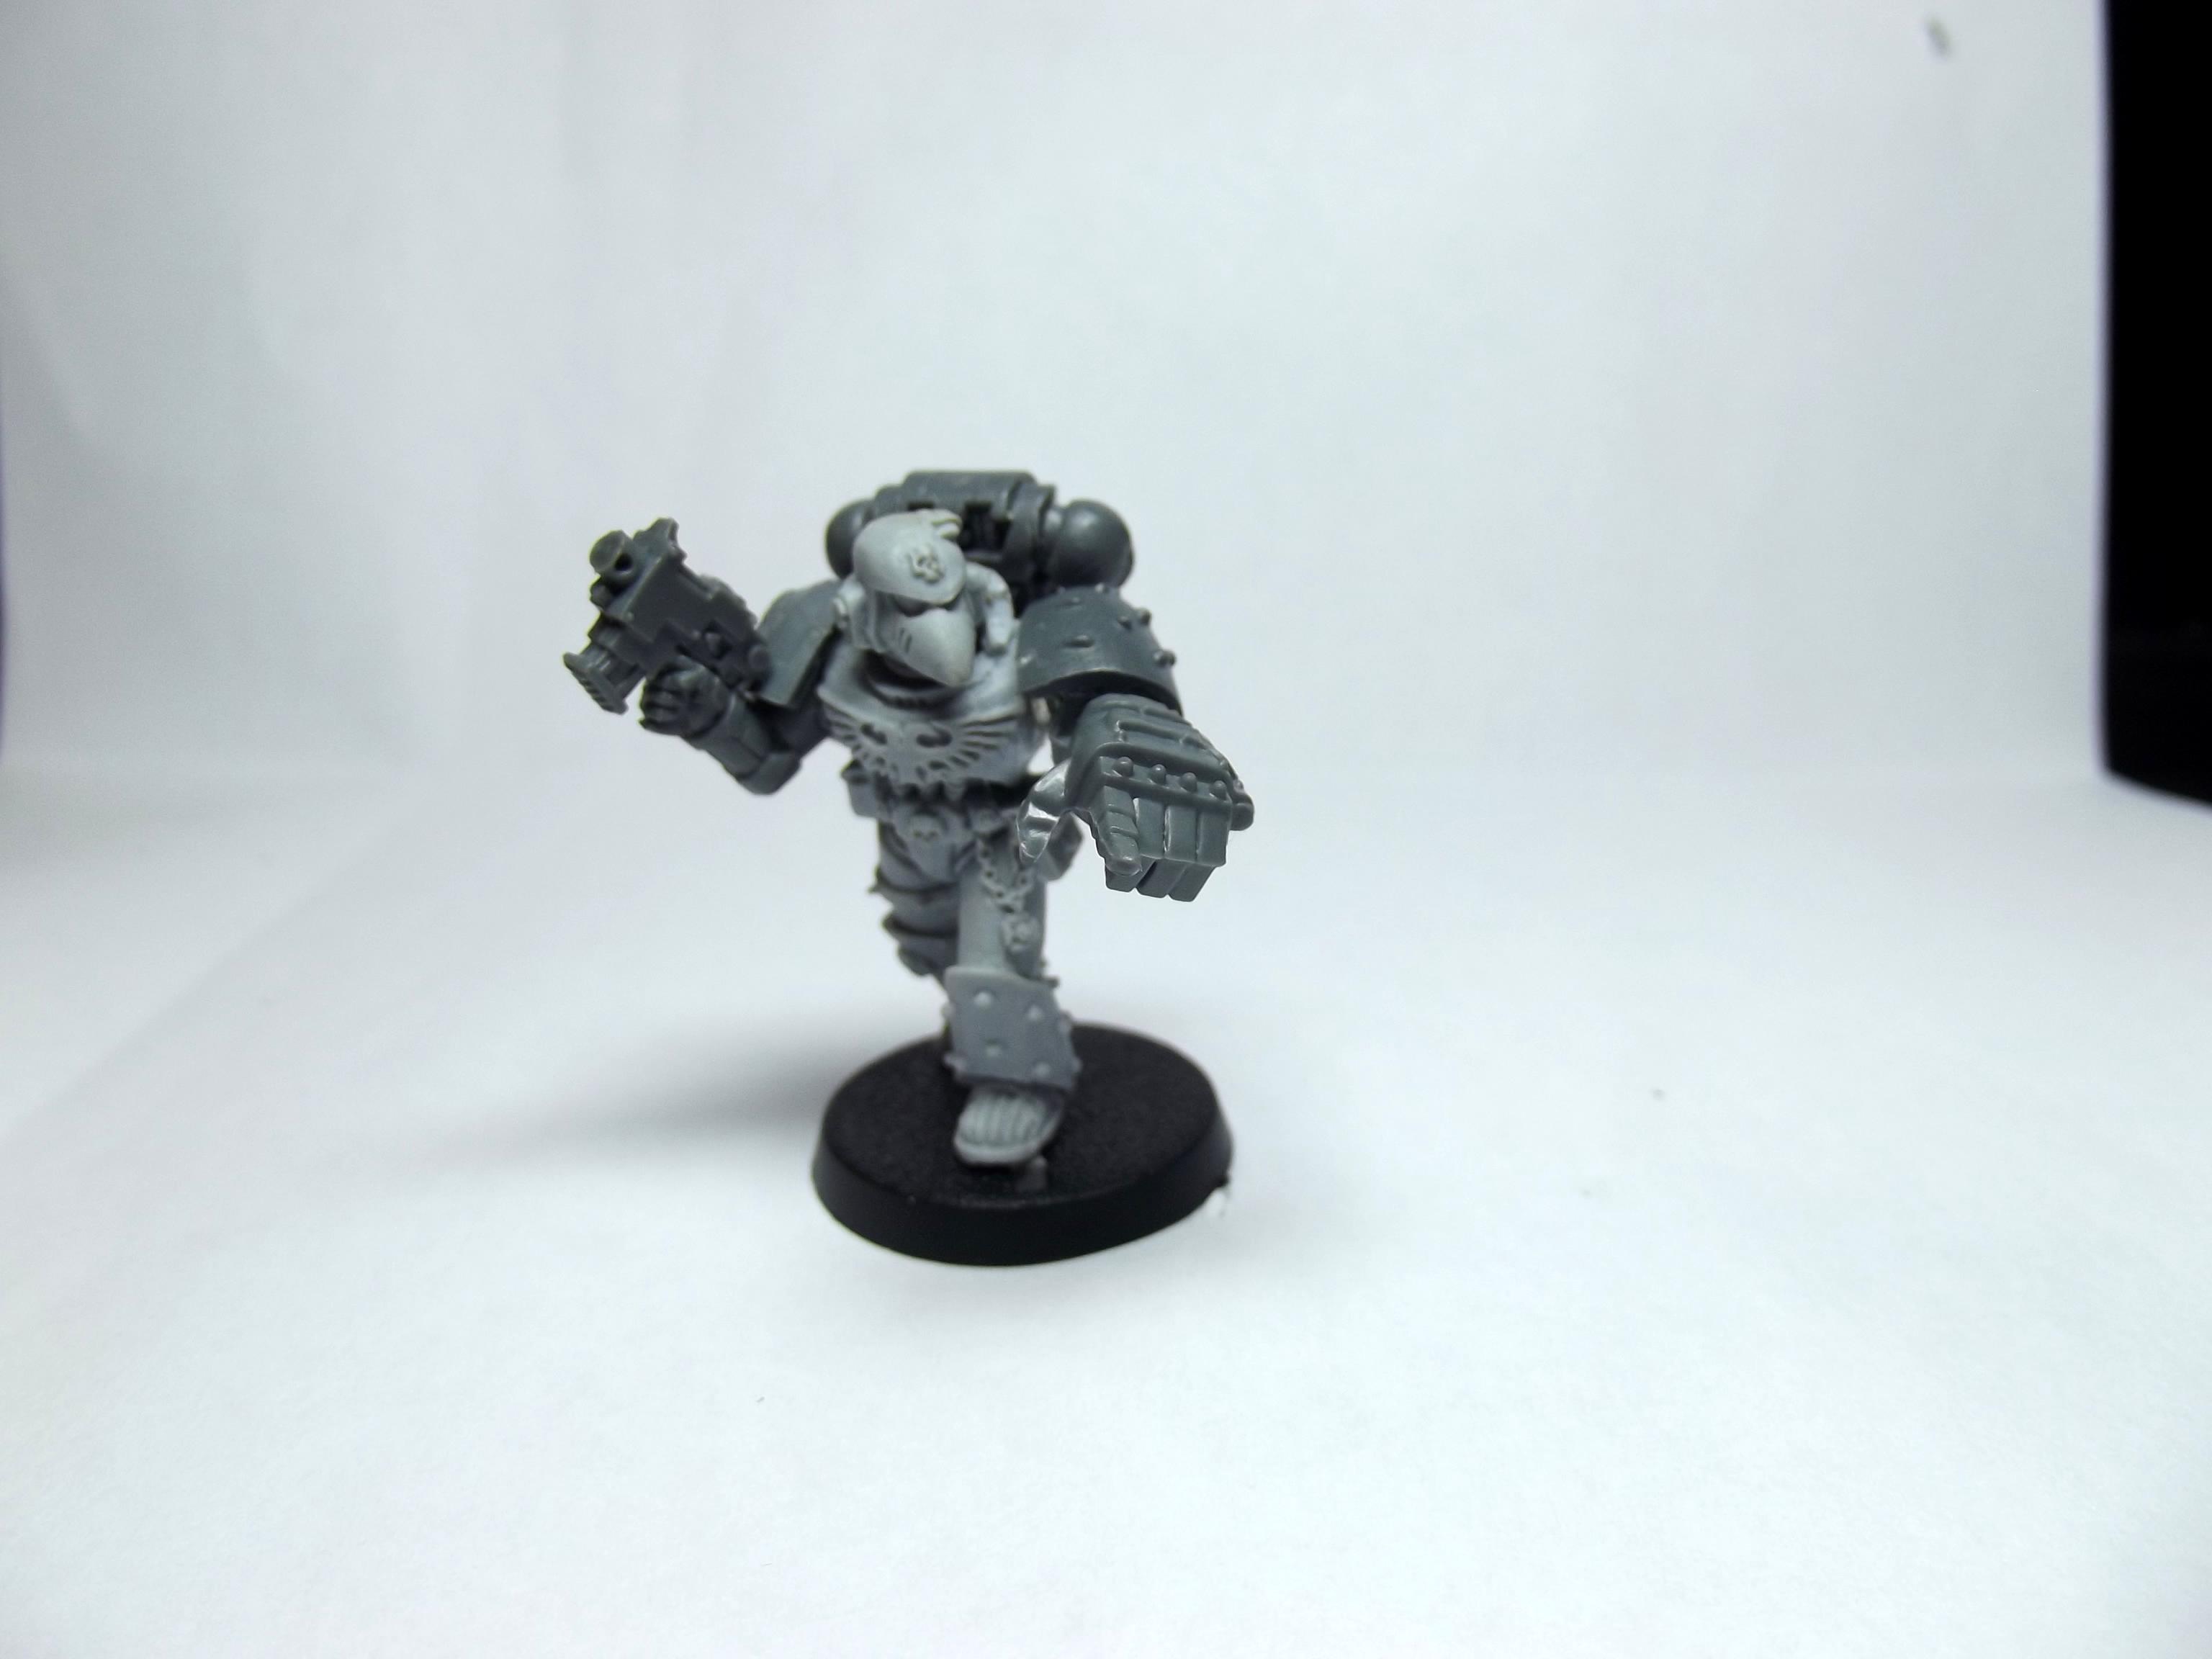 Apothecary, Same model with power fist